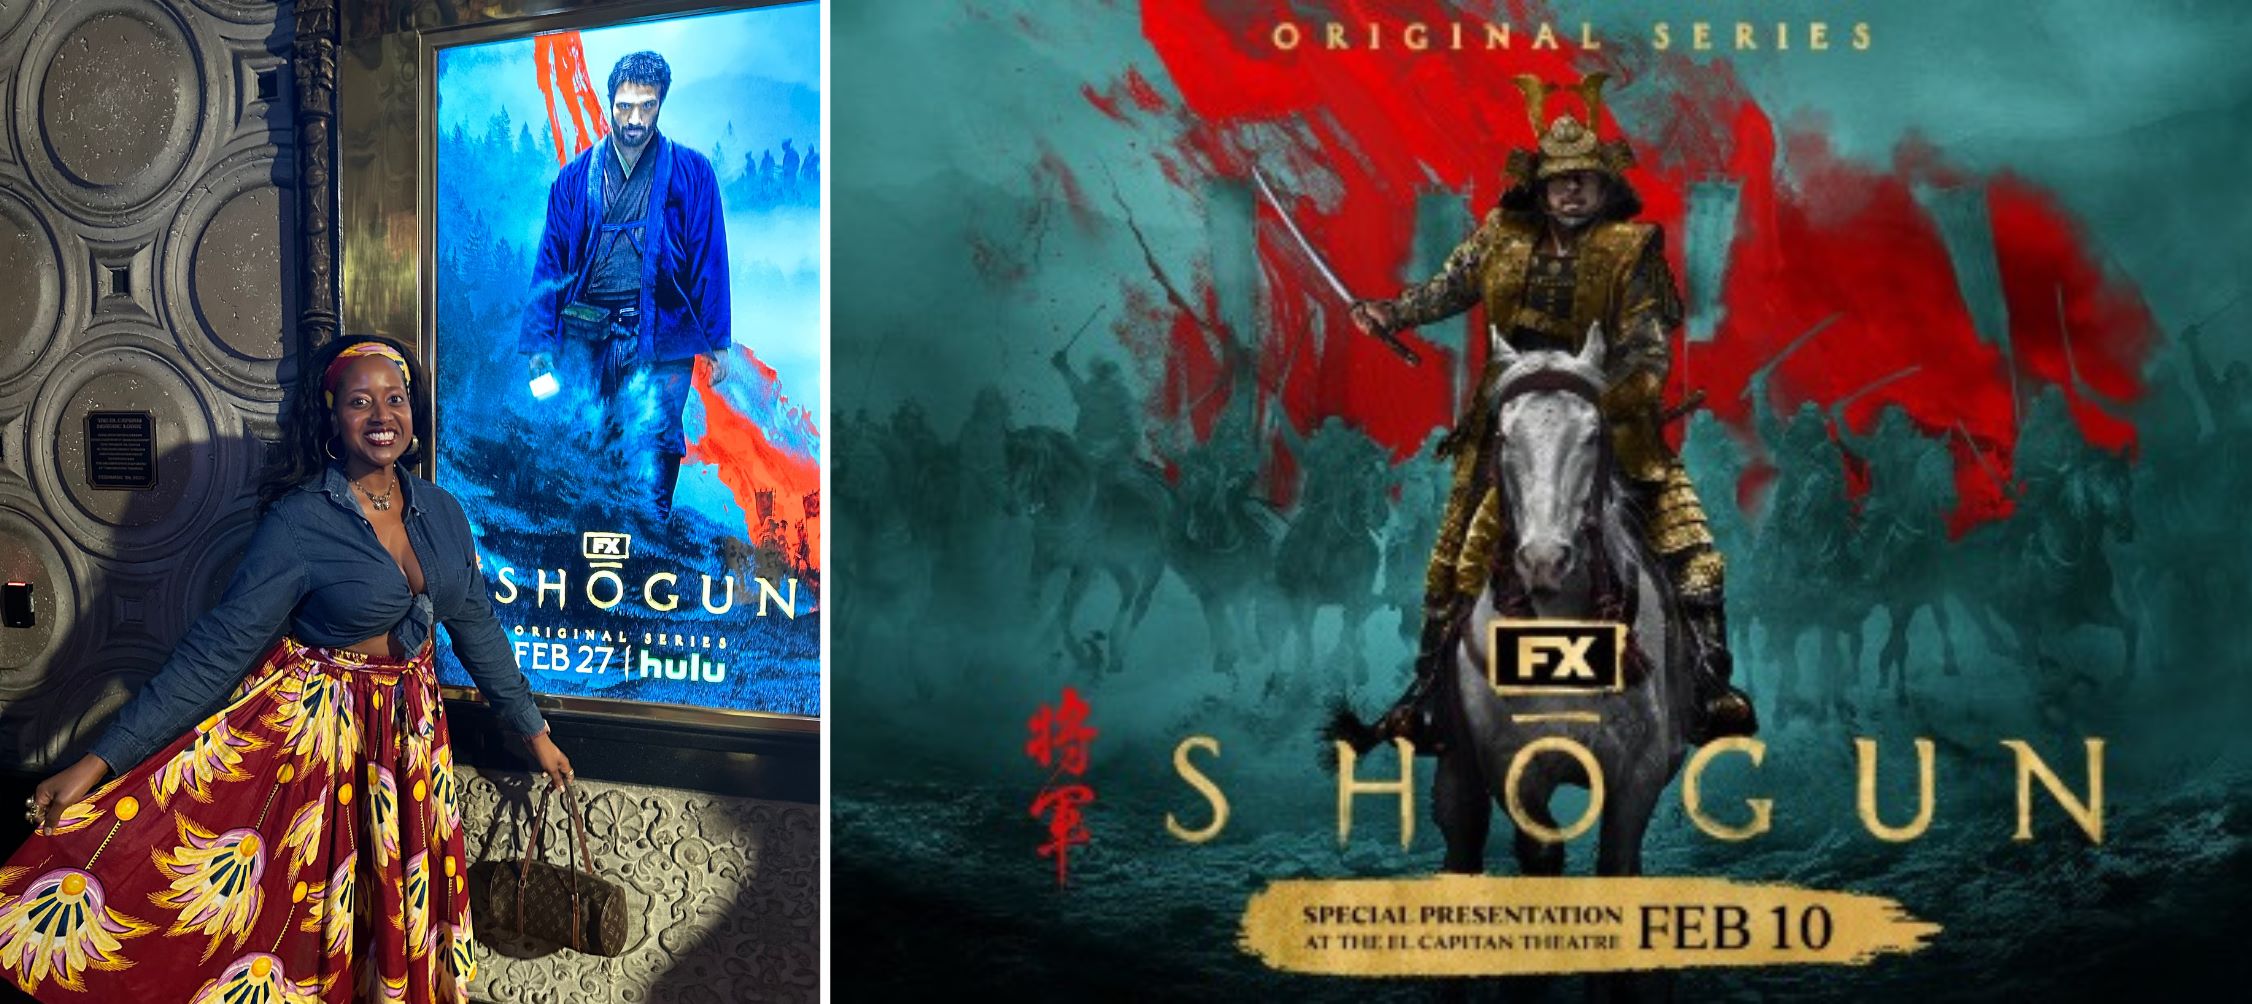 Disney’s Gritty, Action-Packed Shōgun Miniseries Premieres on FX and Hulu